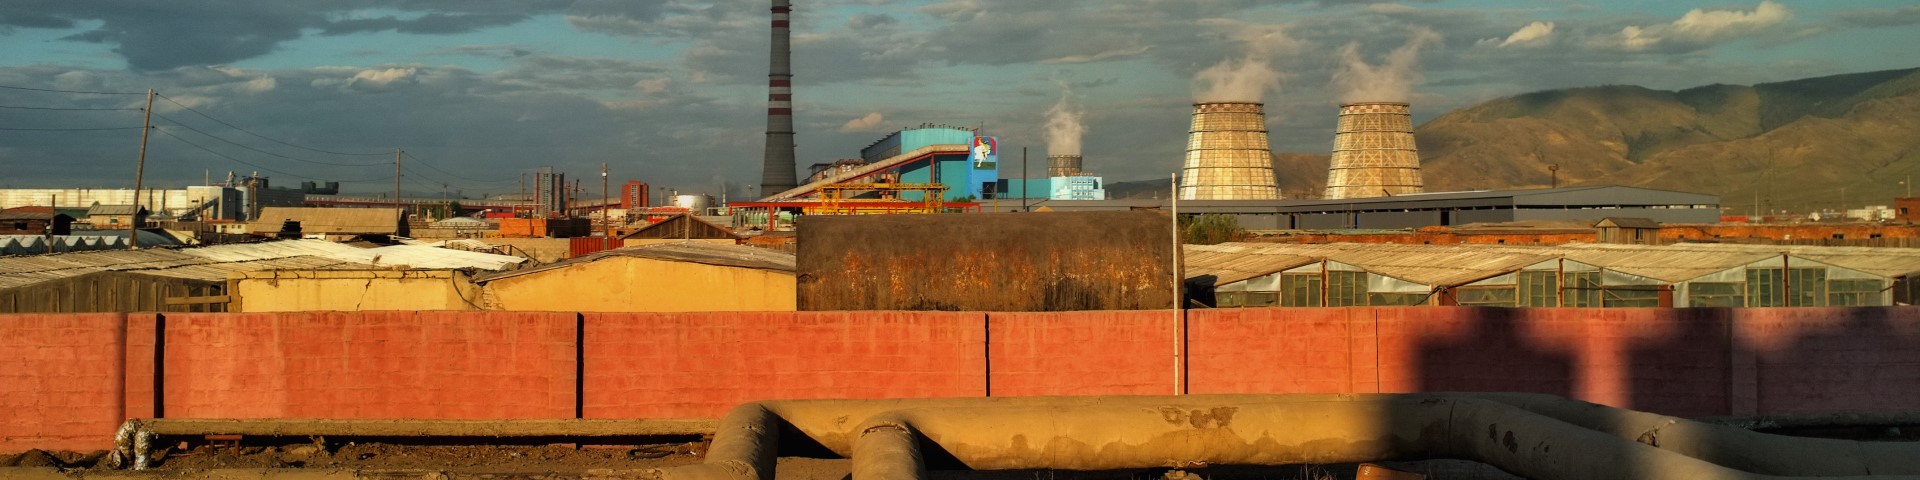 Industrial plants with chimneys in the background